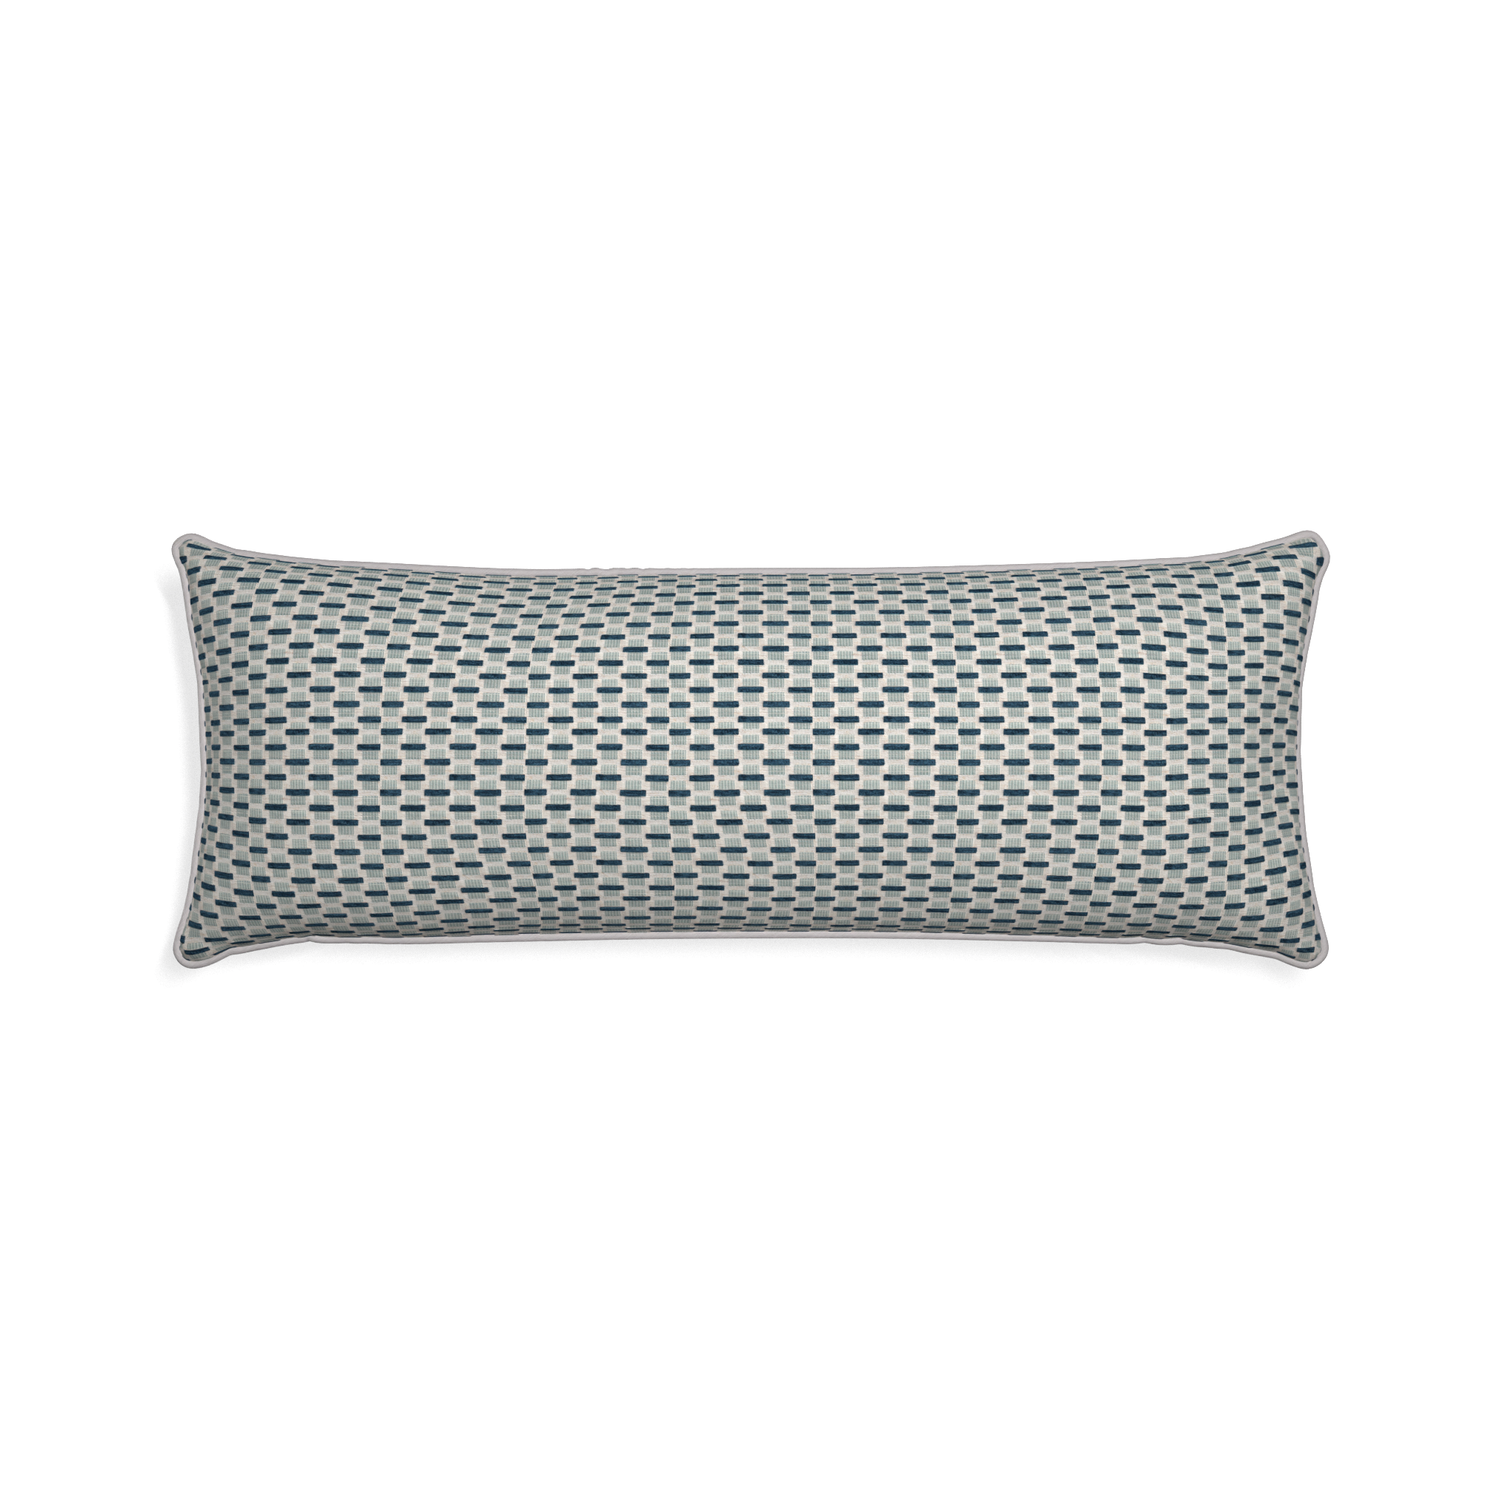 Xl-lumbar willow amalfi custom blue geometric chenillepillow with pebble piping on white background